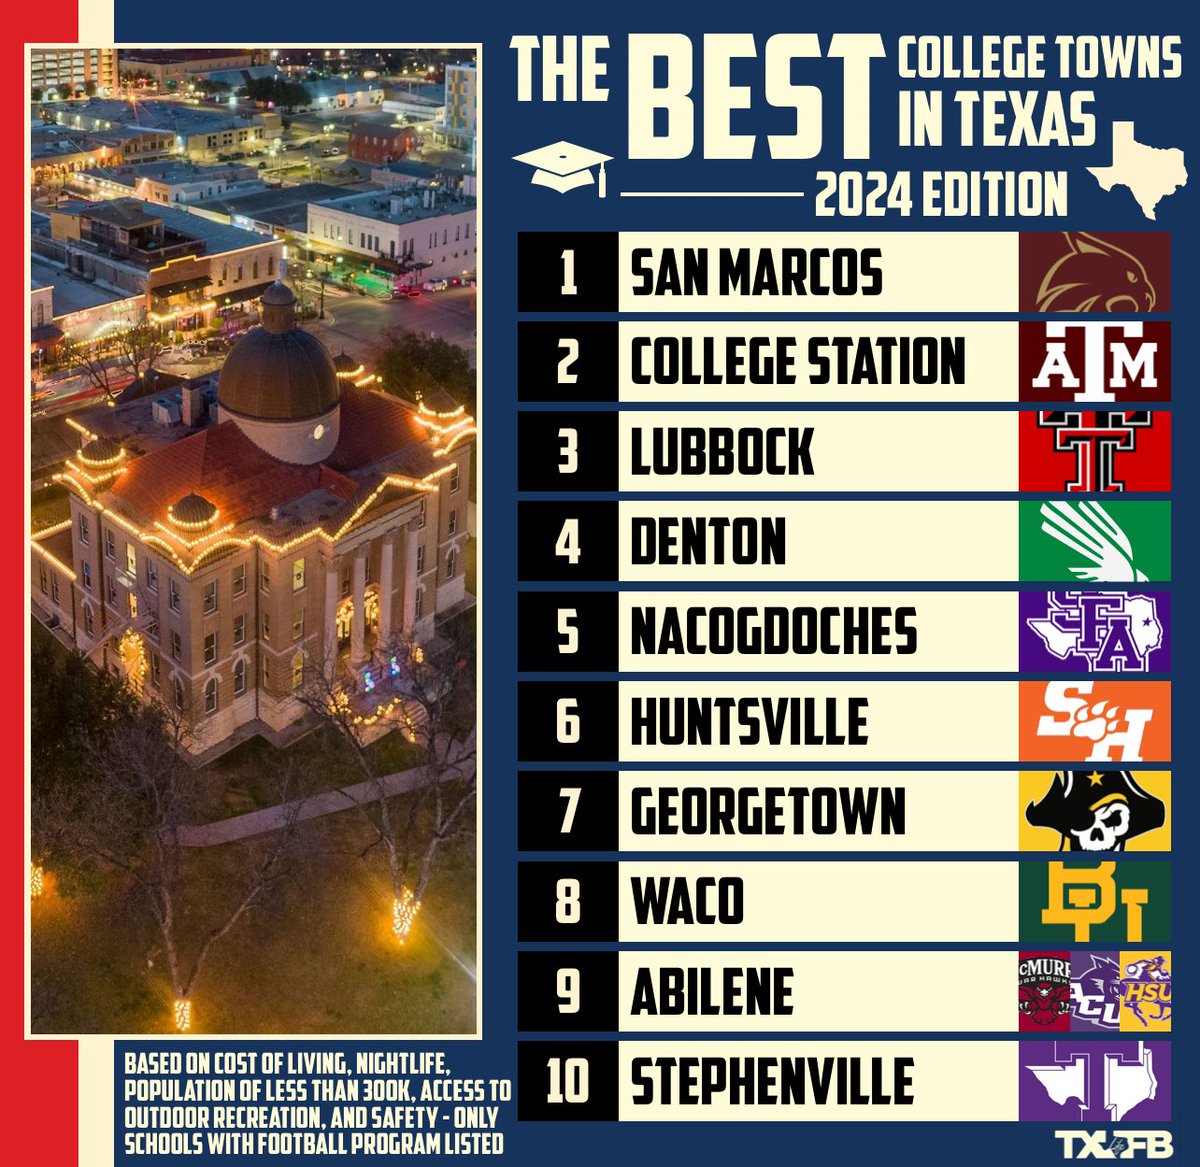 🆕 For the second year in a row, San Marcos tops our list as the best college town in the state!